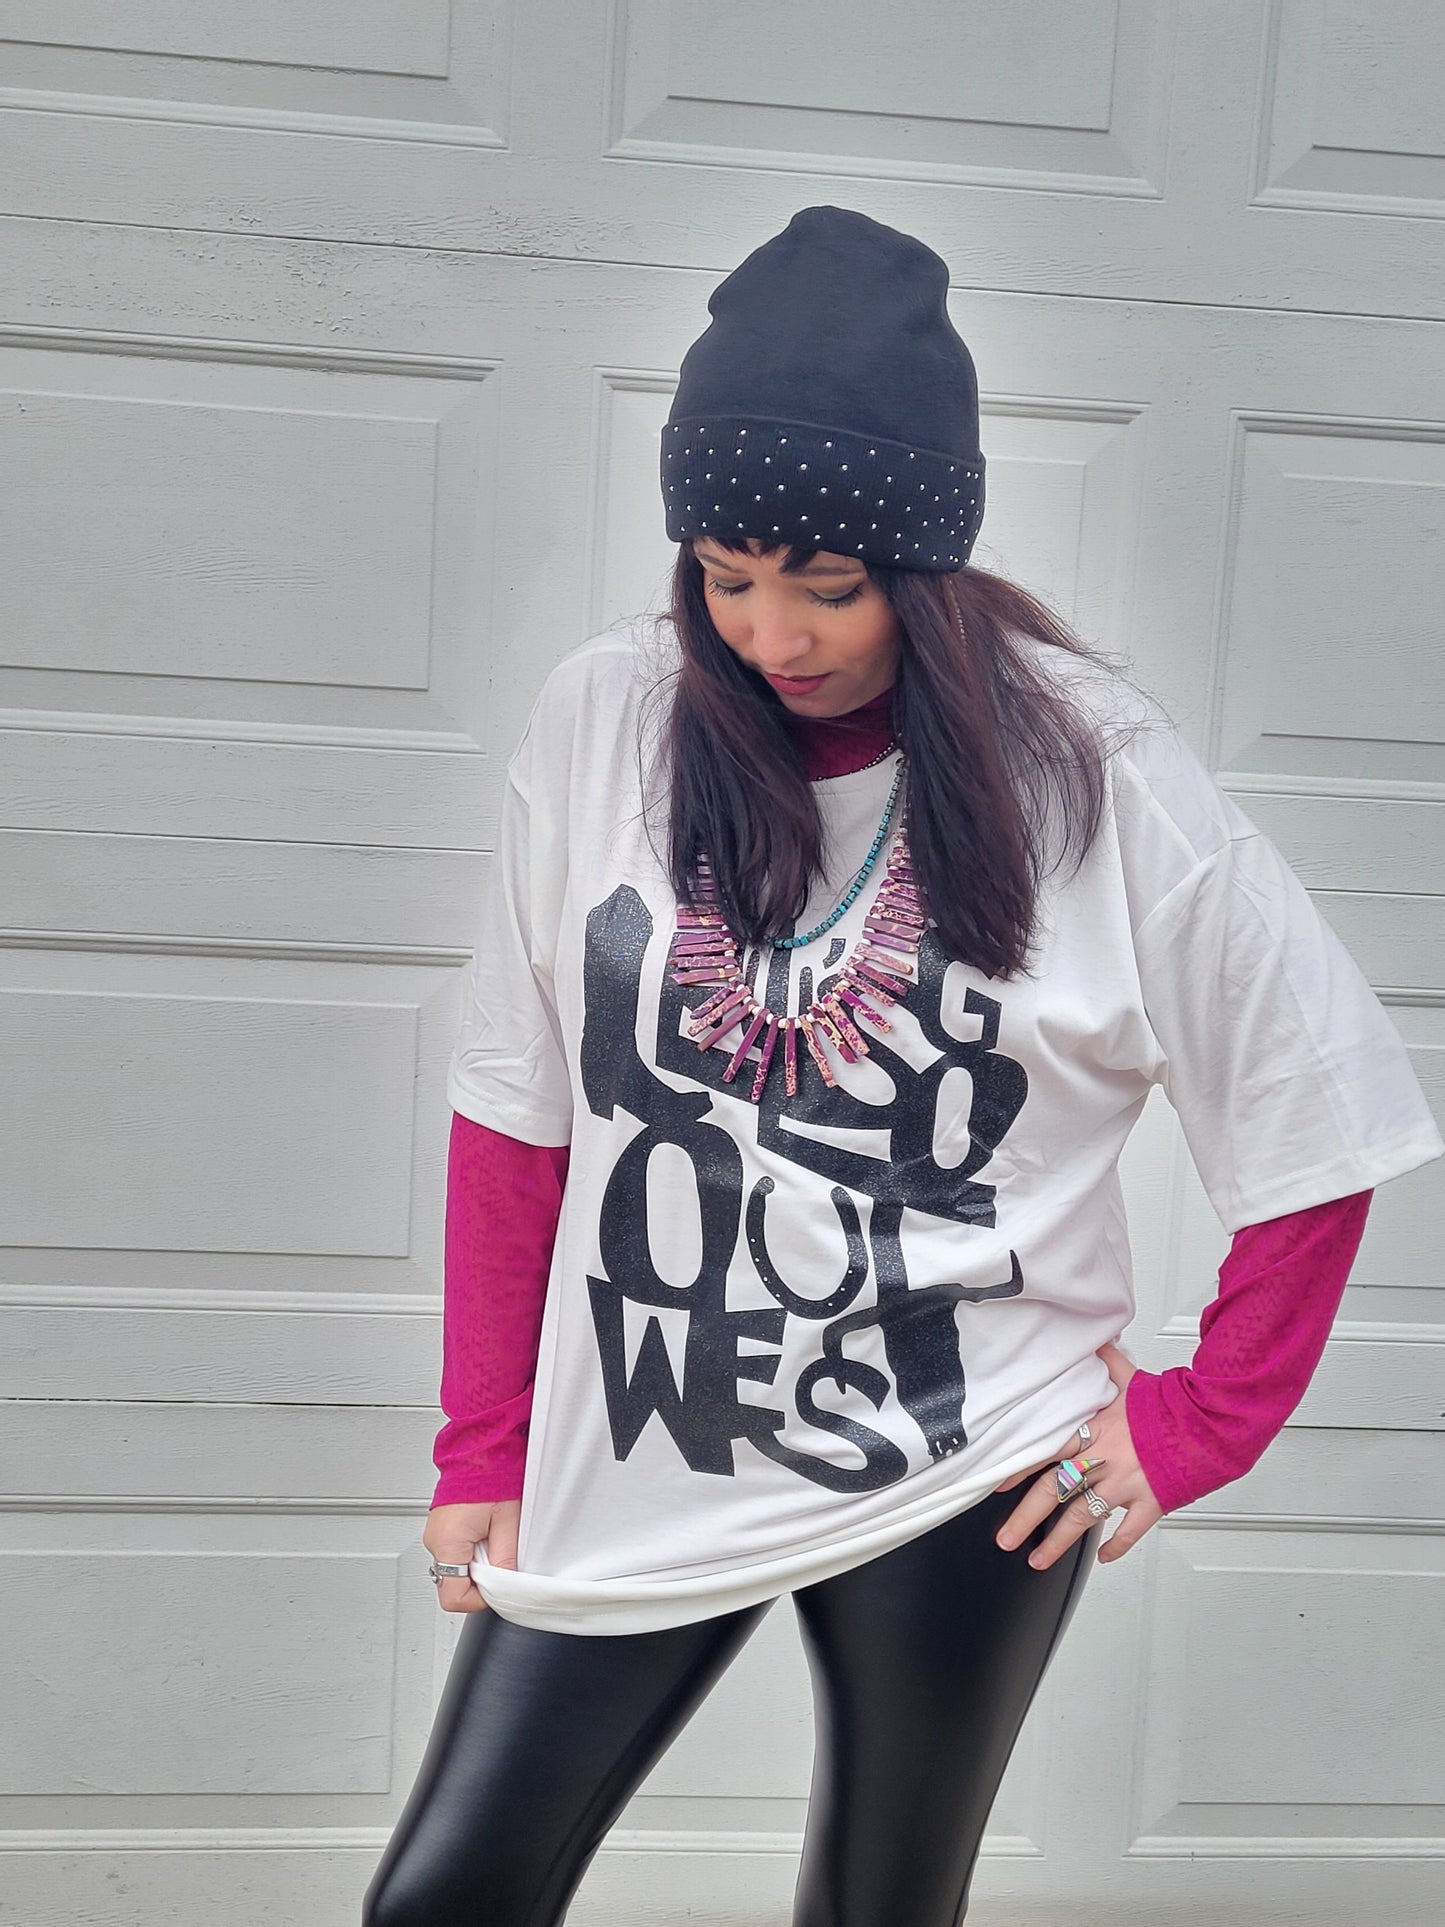 Out West Tee